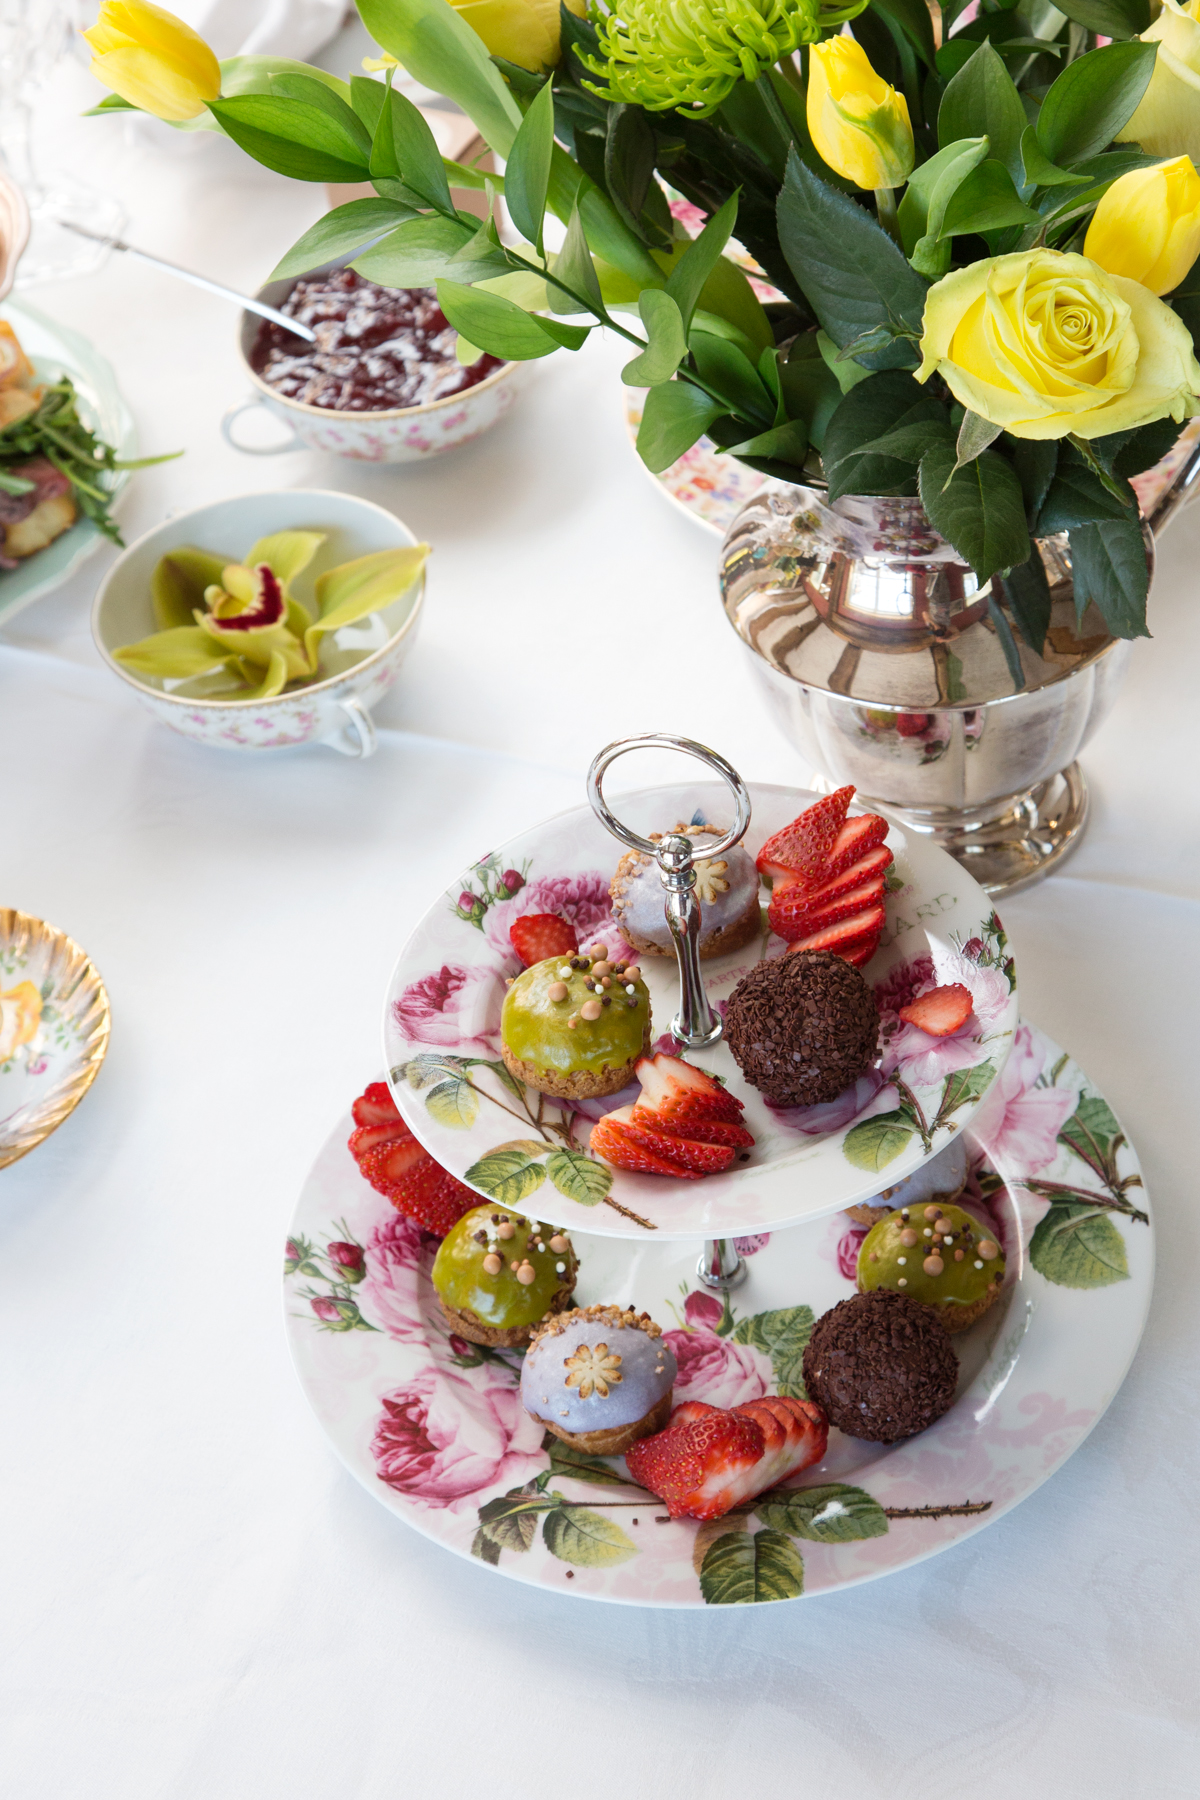 How to host a vintage inspired High Tea